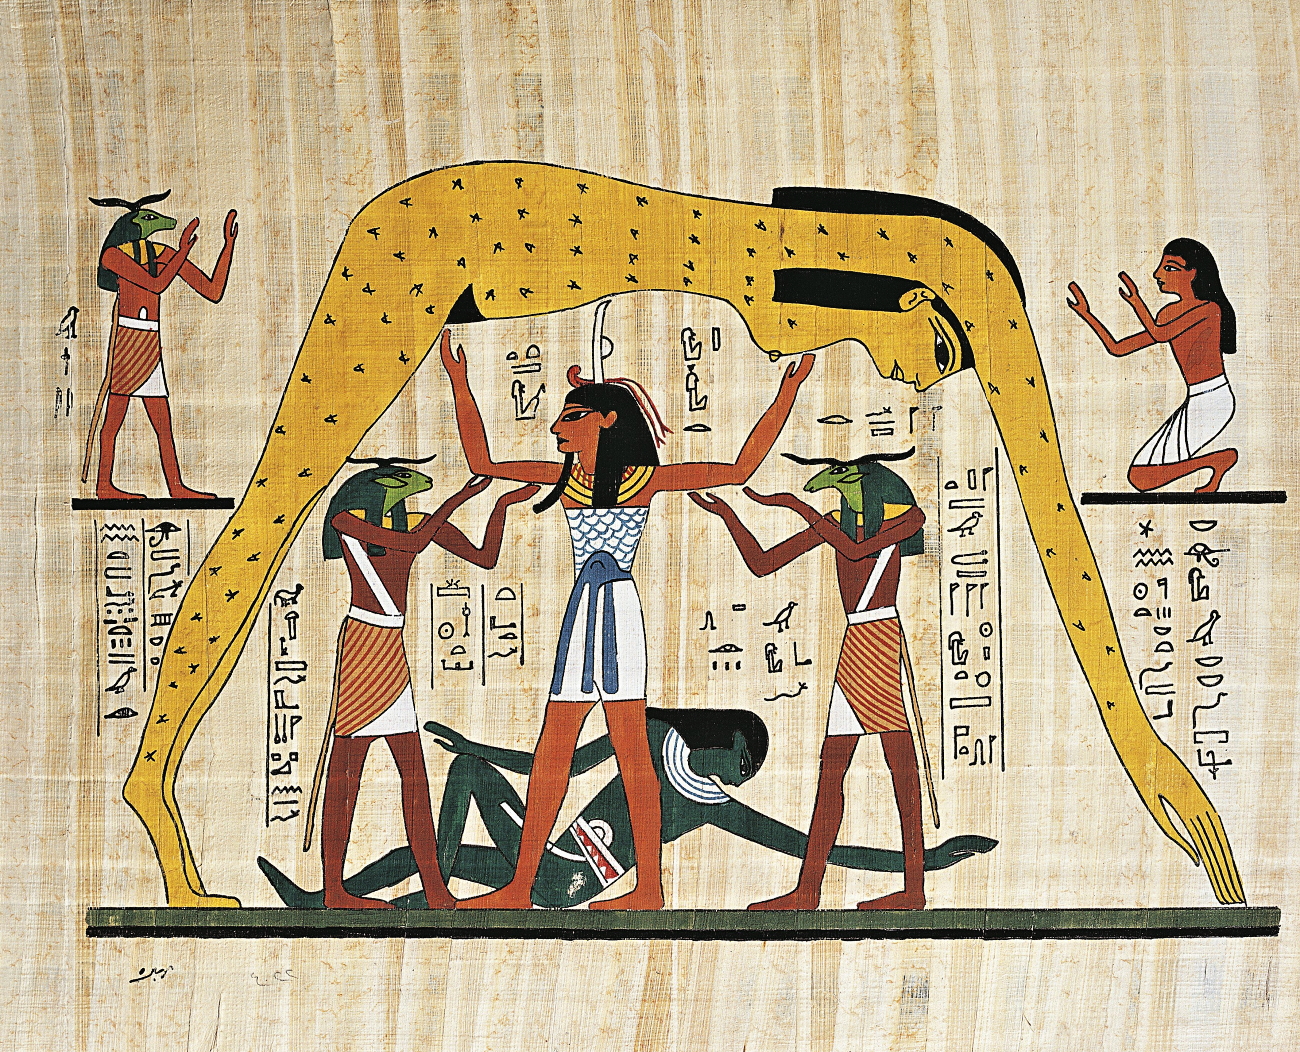 The ancient Egyptian goddess of the sky: How a researcher used modern astronomy to explore her link with the Milky Way